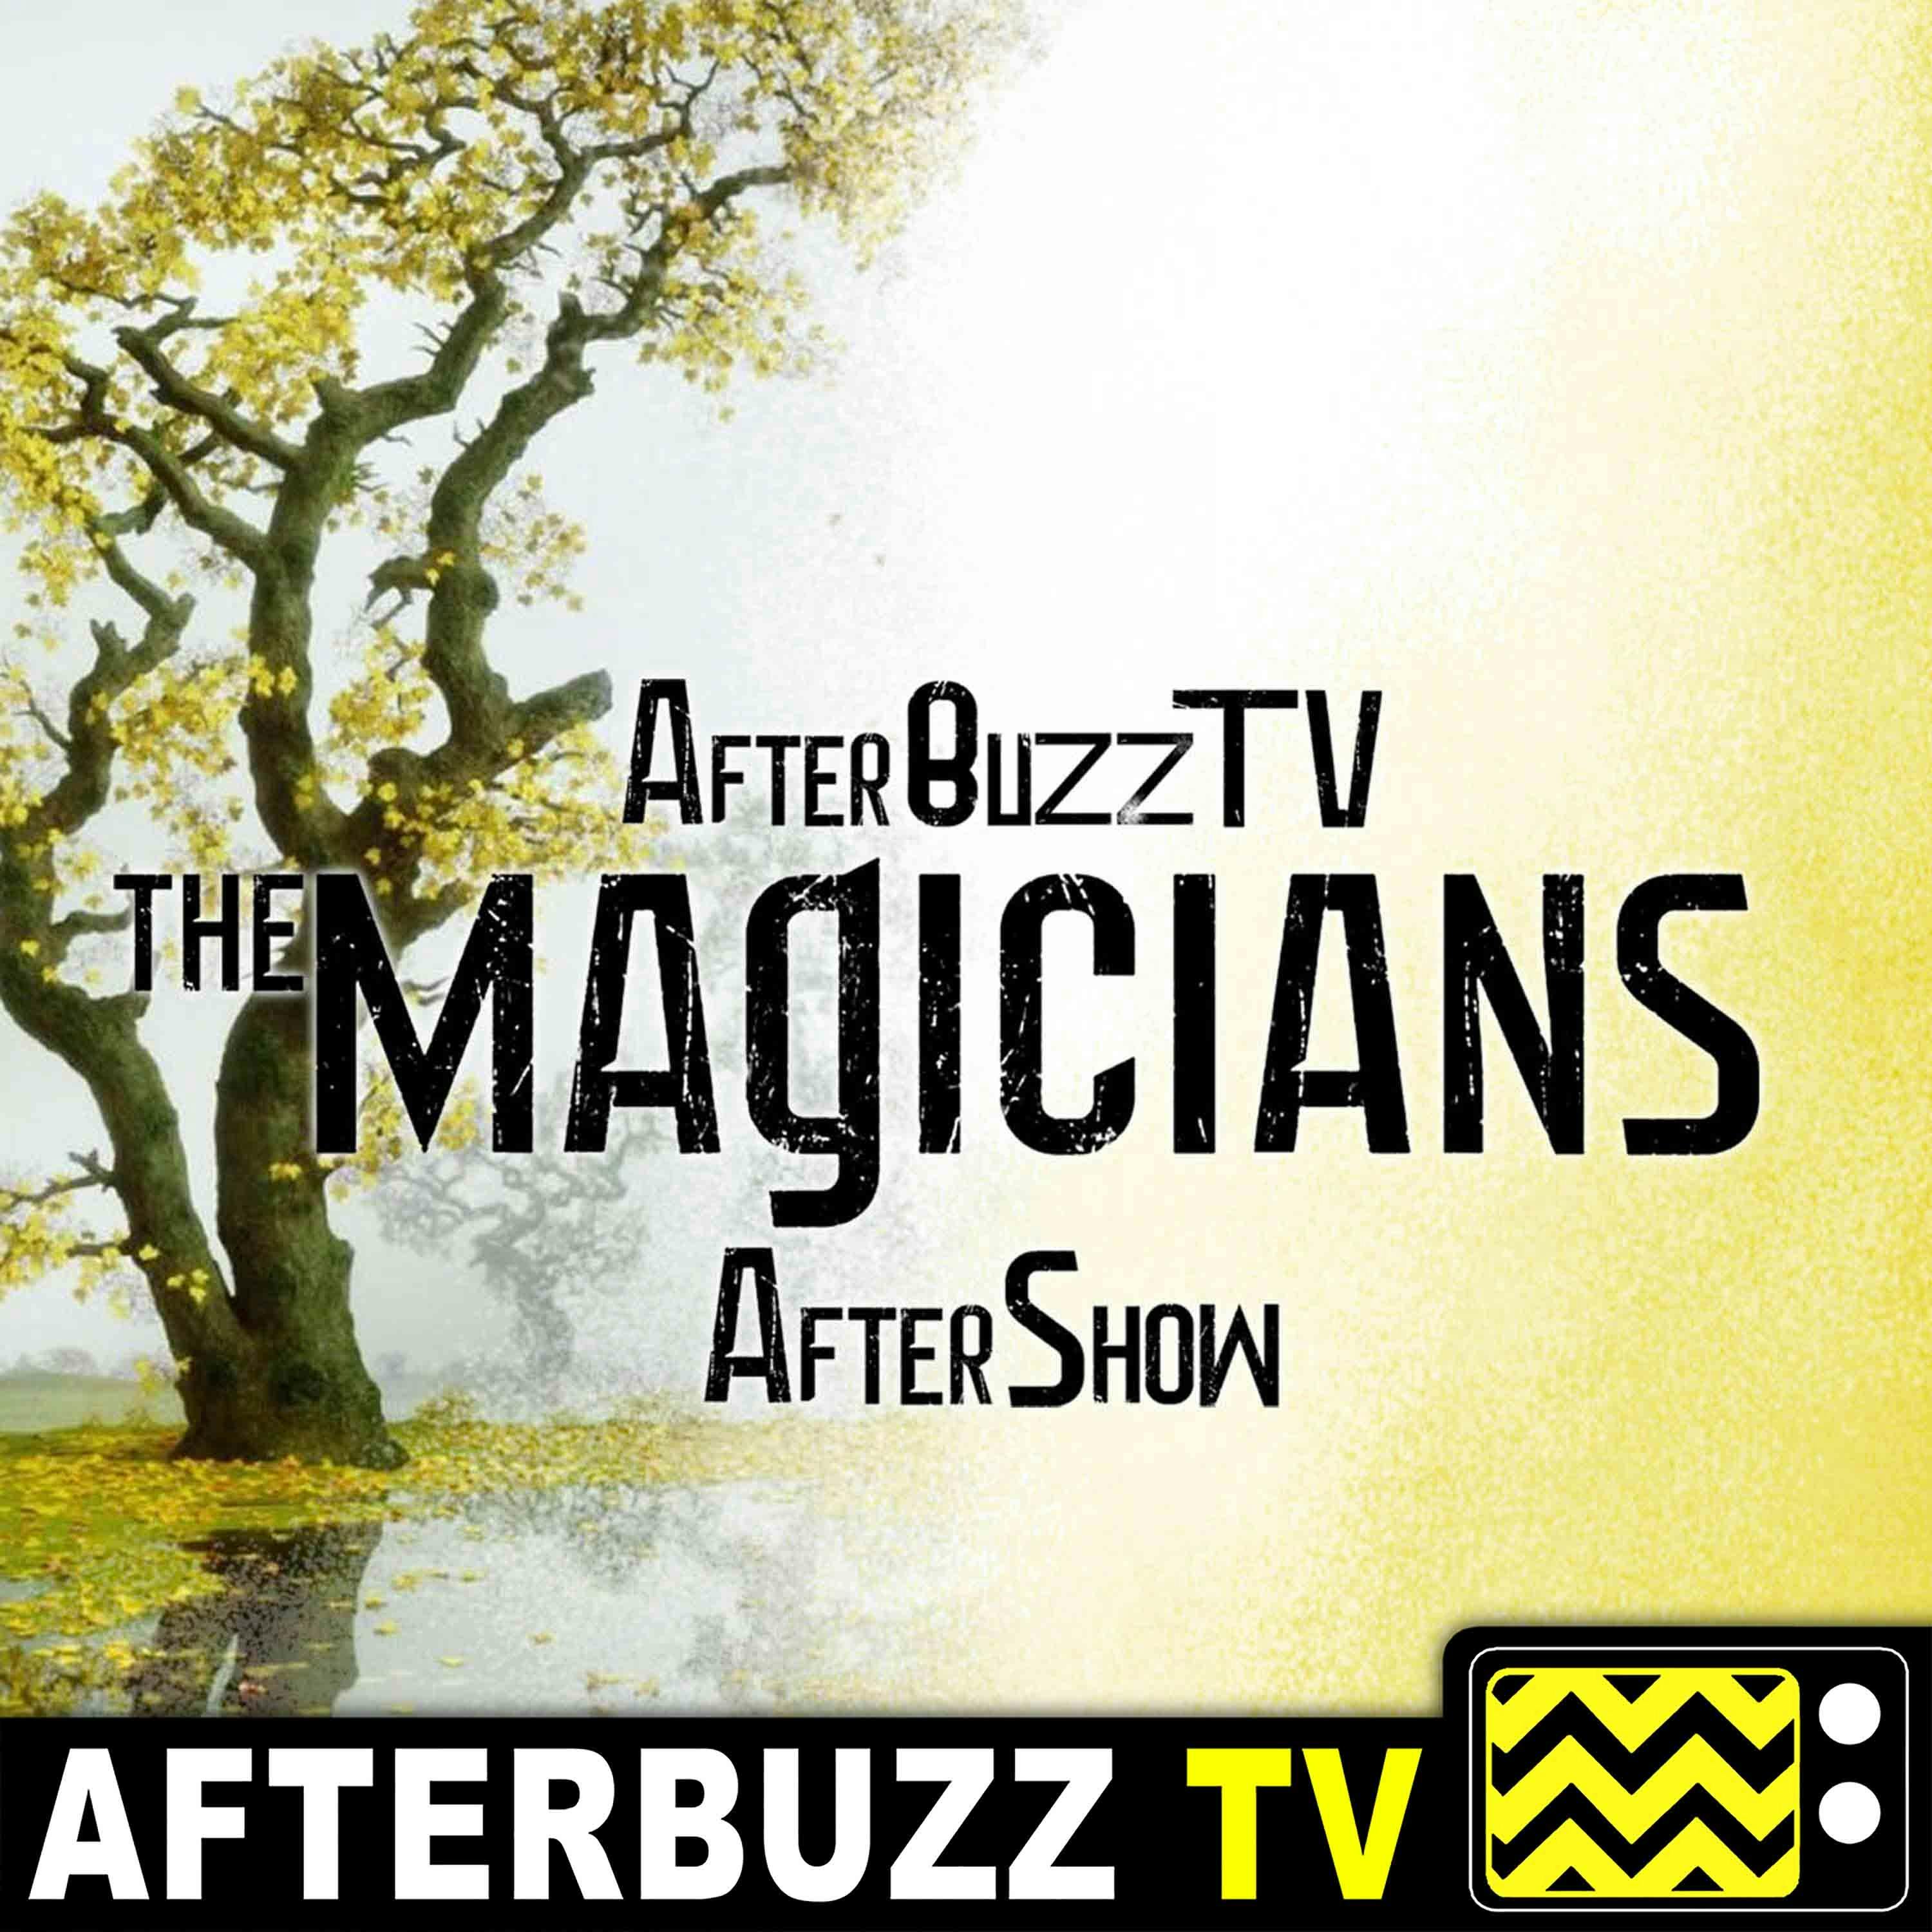 The Magicians S:3 | The Fillorian Candidate E:12 | AfterBuzz TV AfterShow